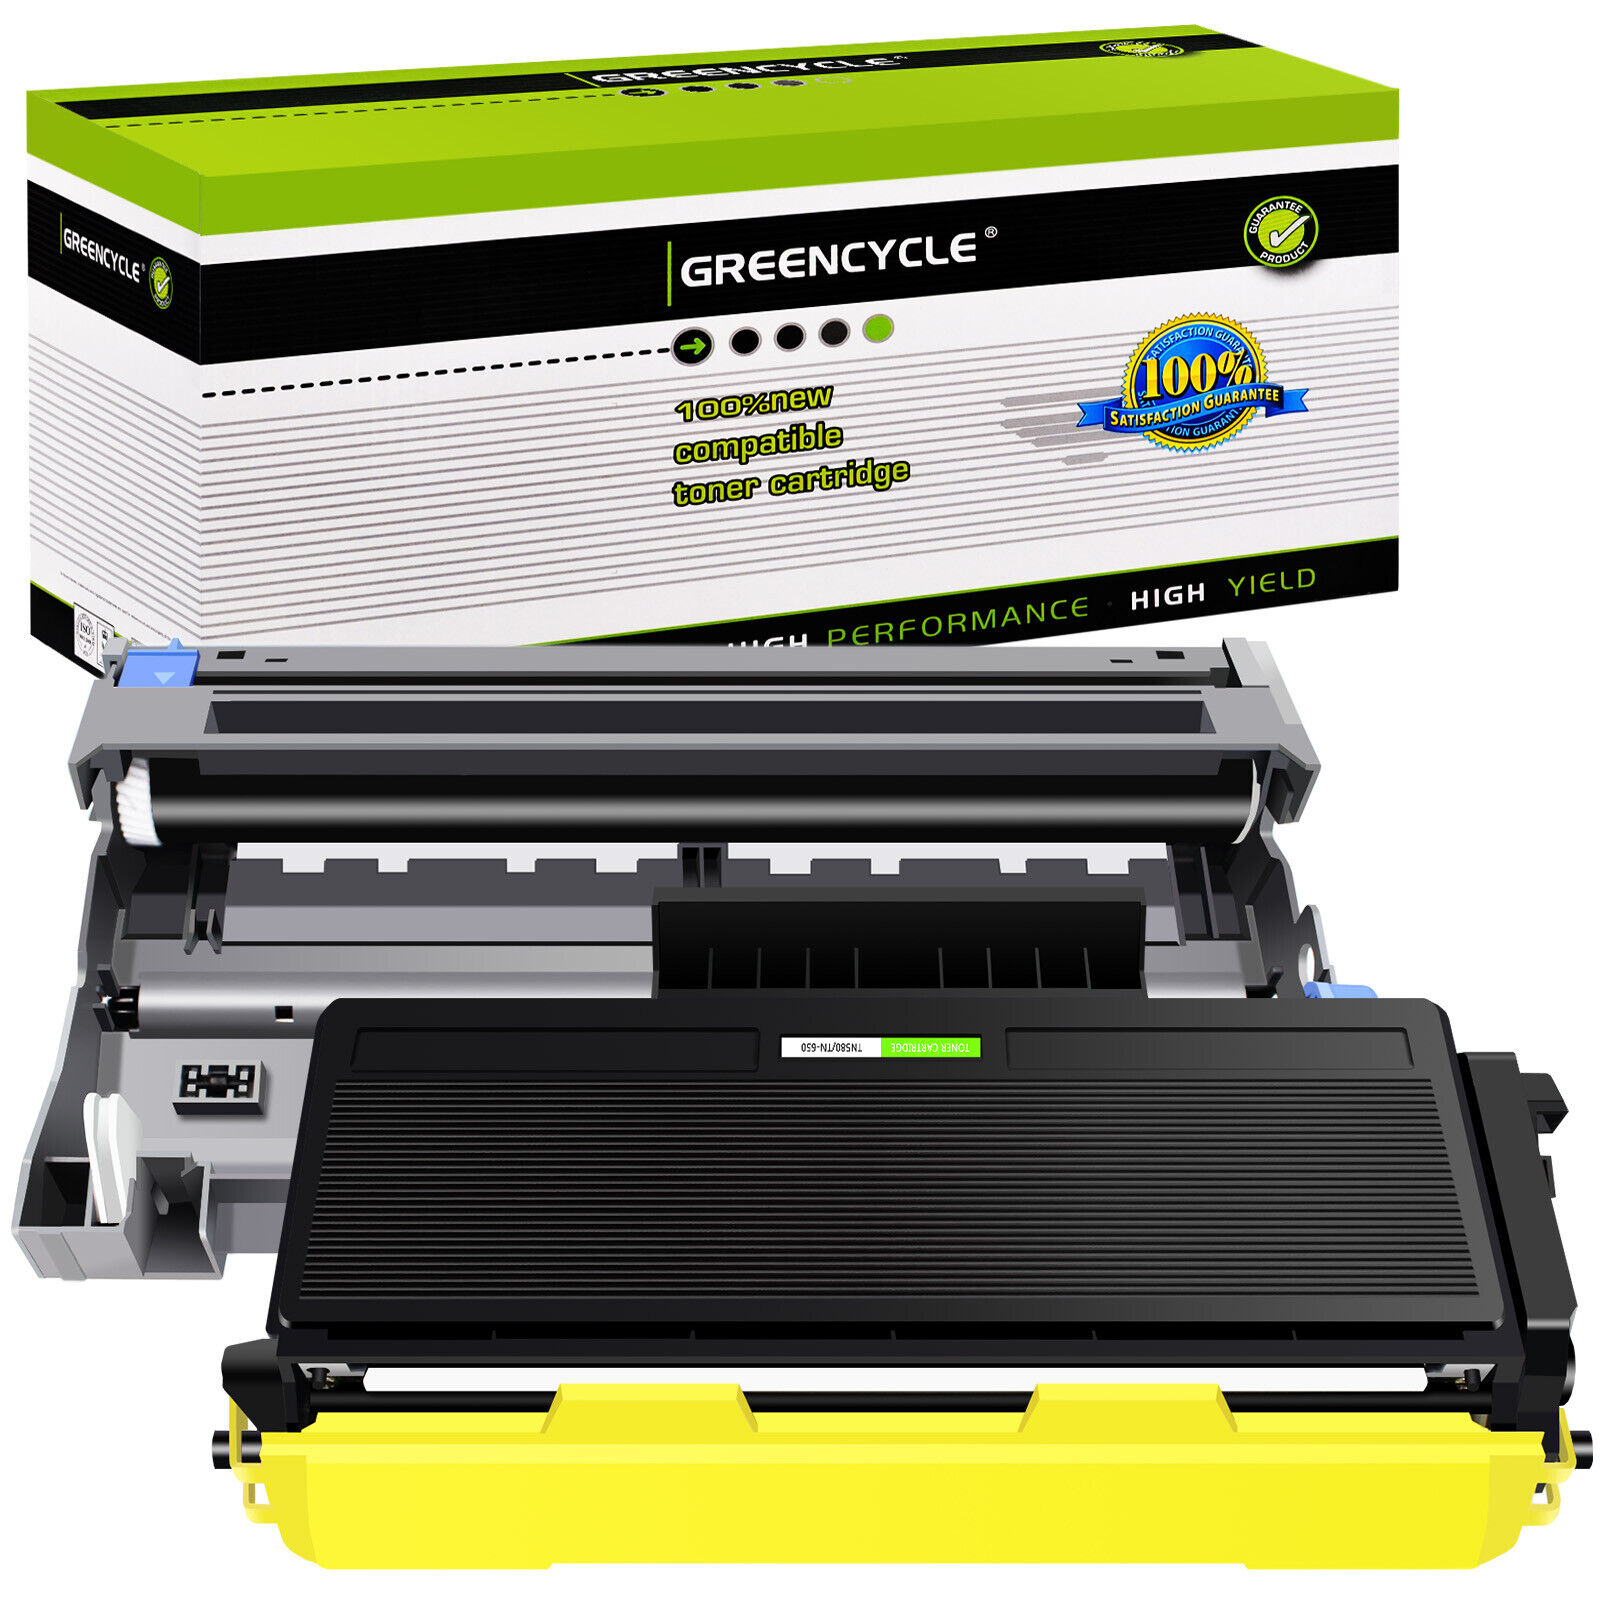 TN650 Toner DR620 Drum Combo For Brother DCP-8050N HL-5340D MFC-8480DN 8680DN